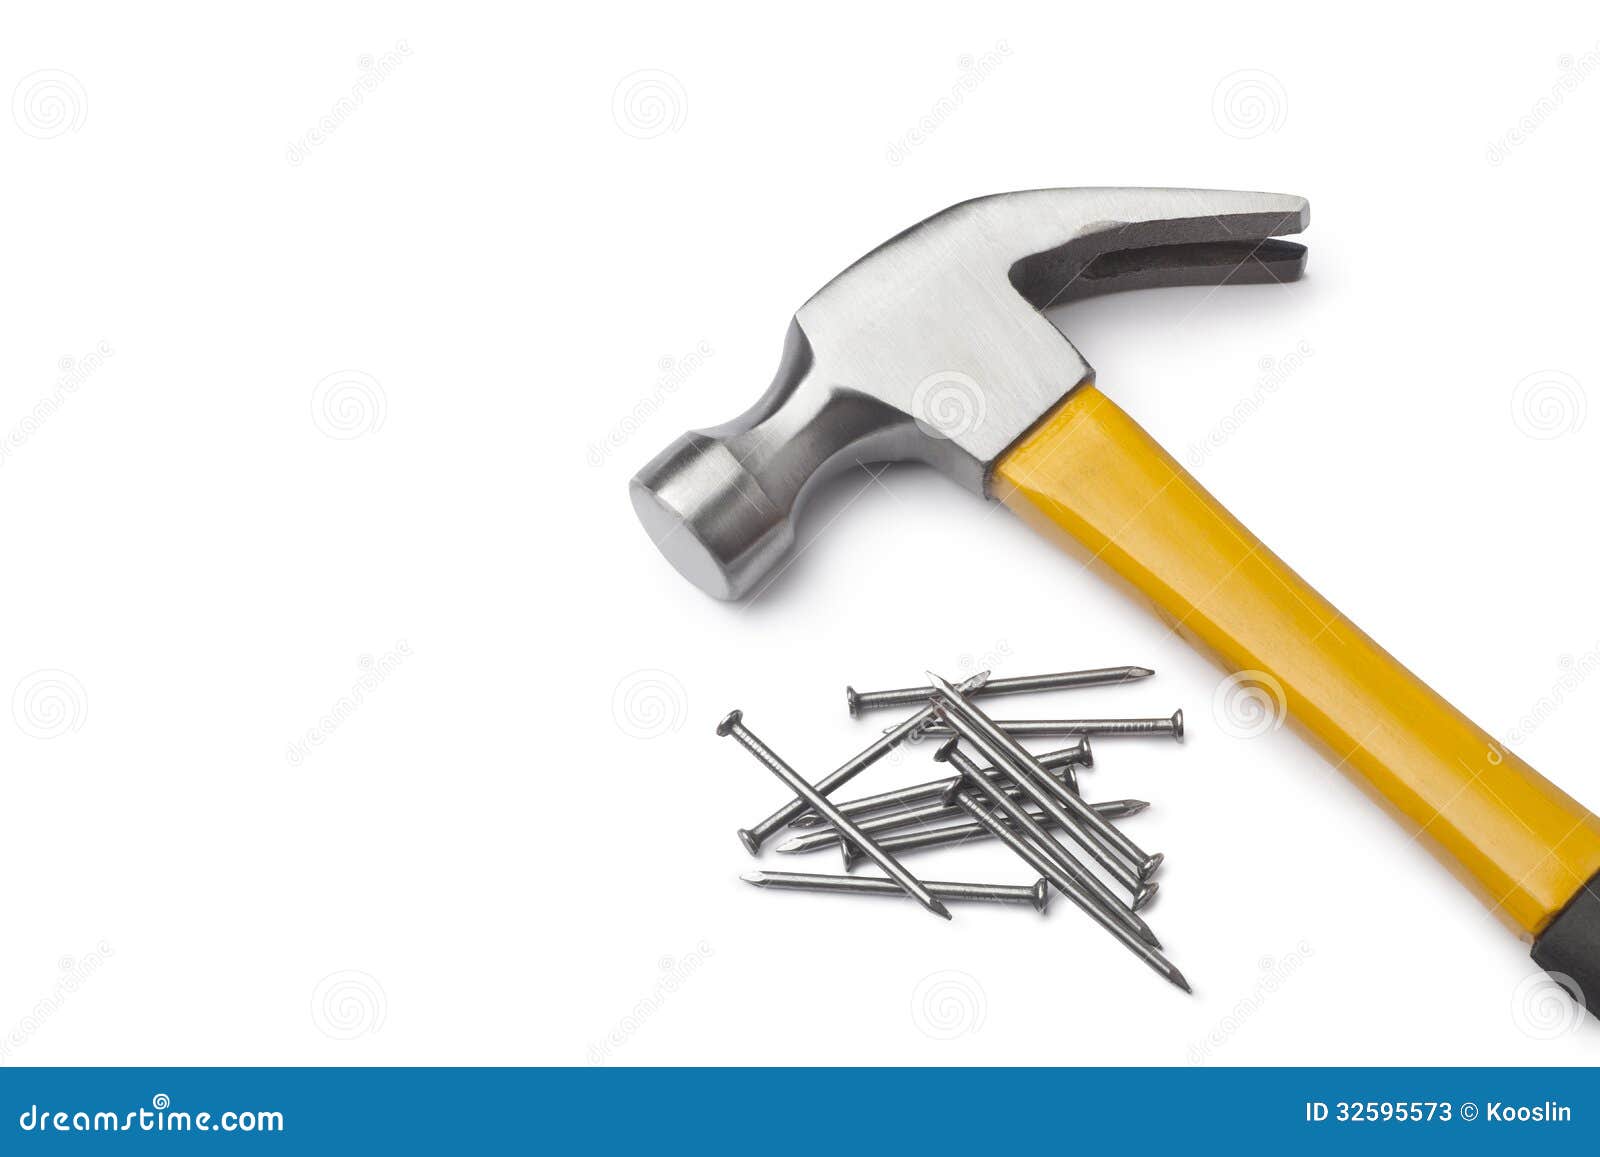 hammer and nails clipart - photo #41